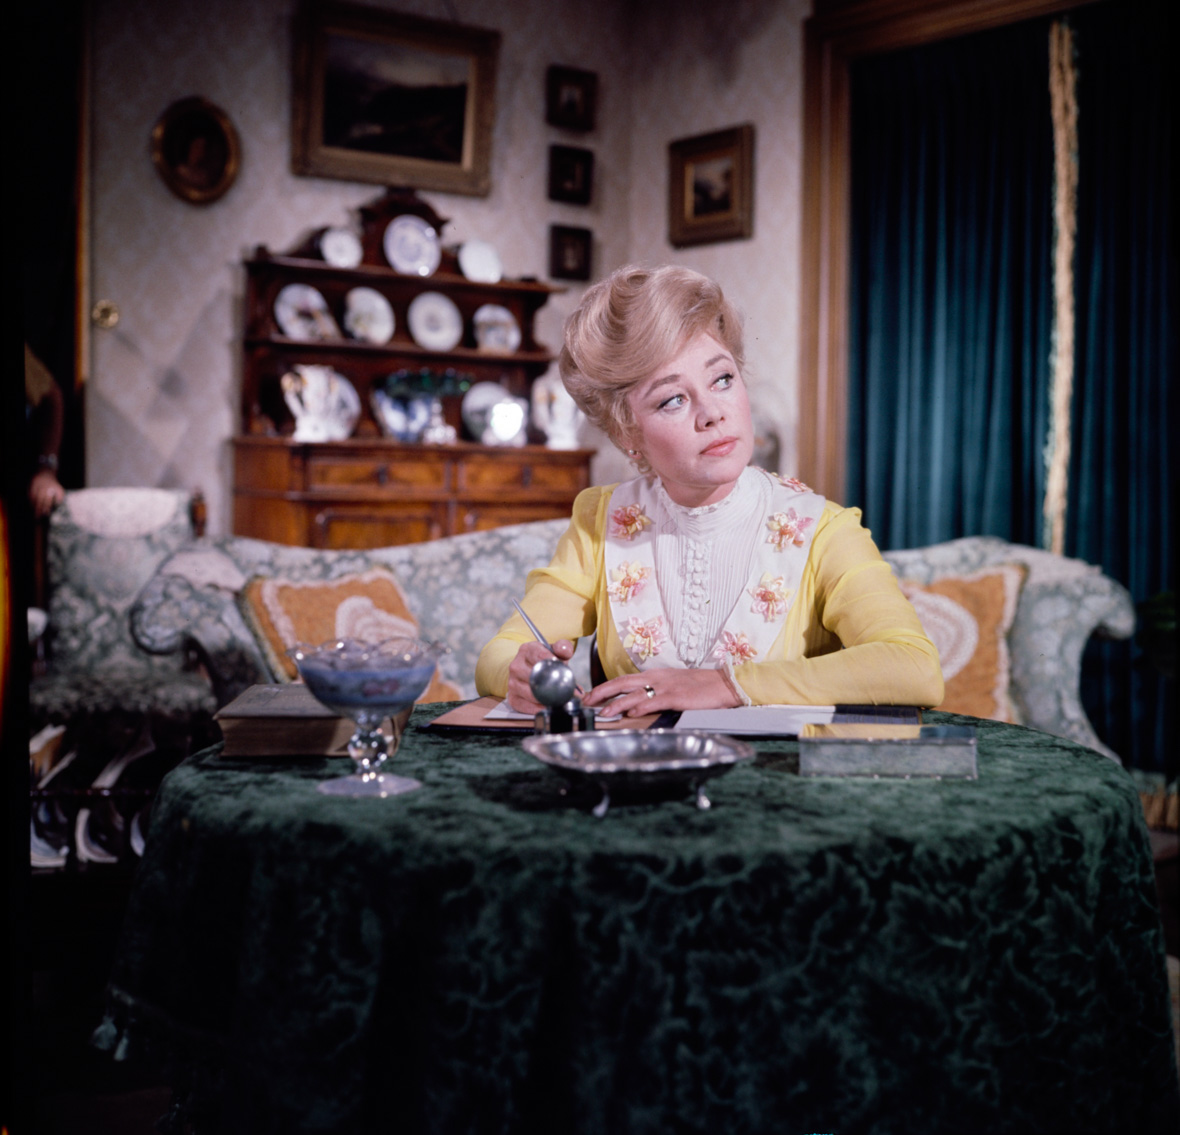 Glynis Johns stars as Winifred Banks in Mary Poppins. She is wearing a yellow dress and is sitting at a table. She is holding a pen in one hand and looking off to the side.